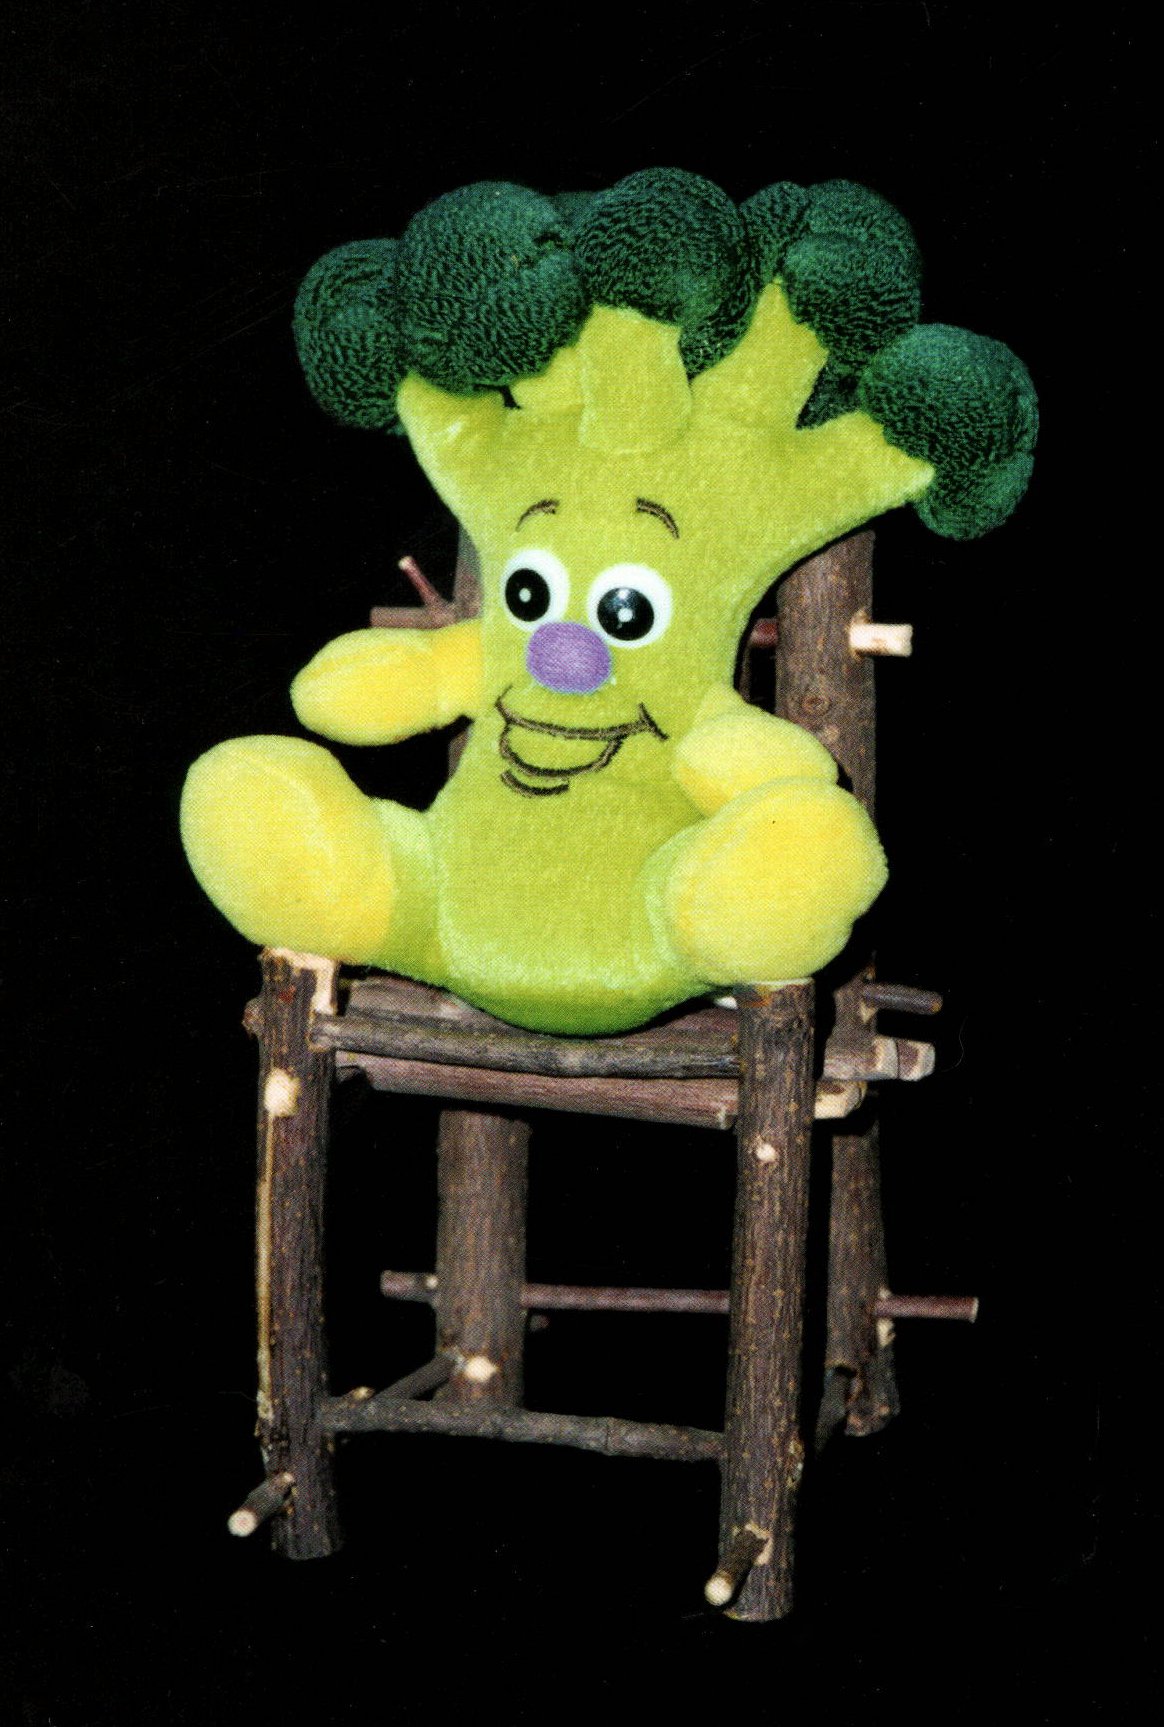 plush toy broccoli with big smile in wooden chair